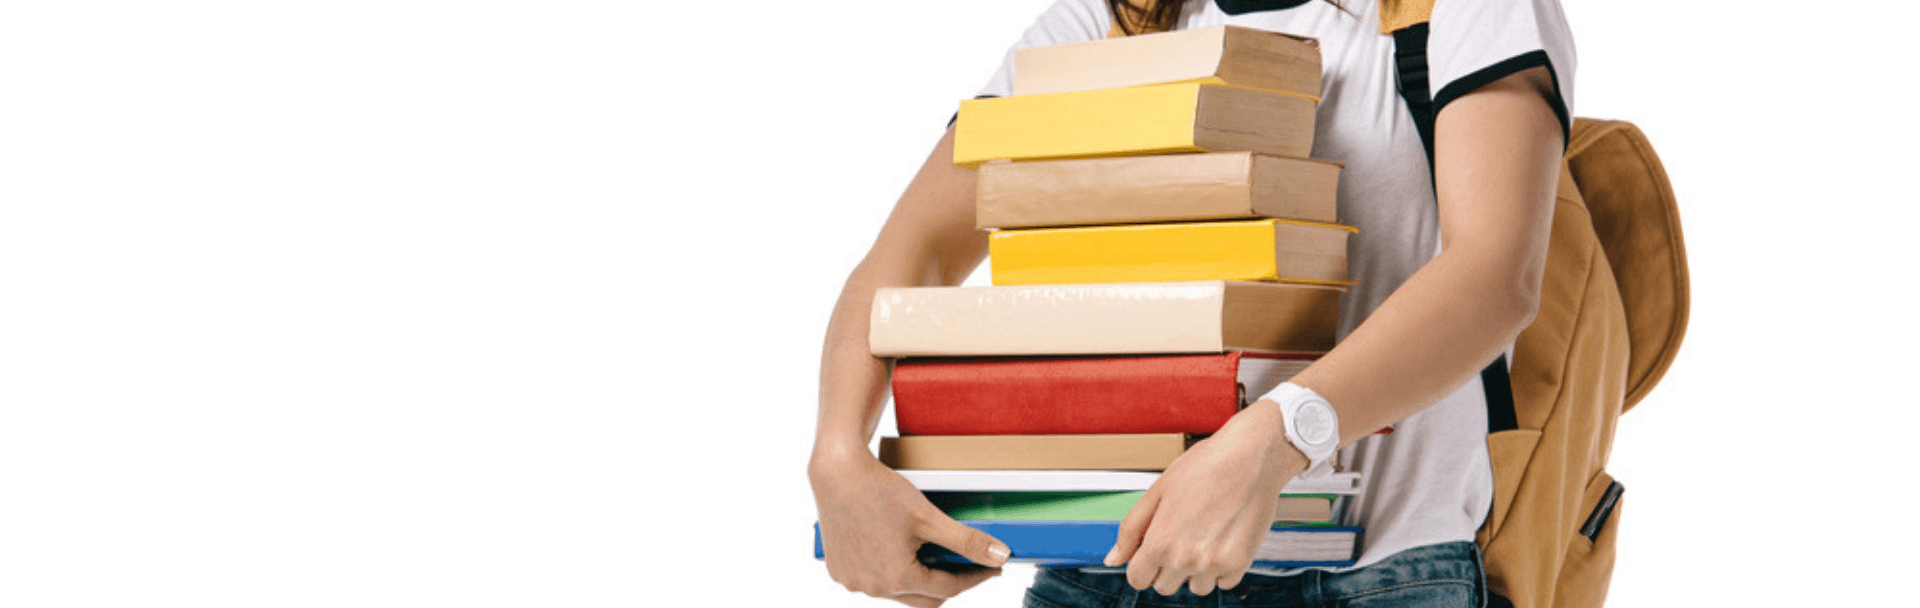 Image of a female student holding a pile of books